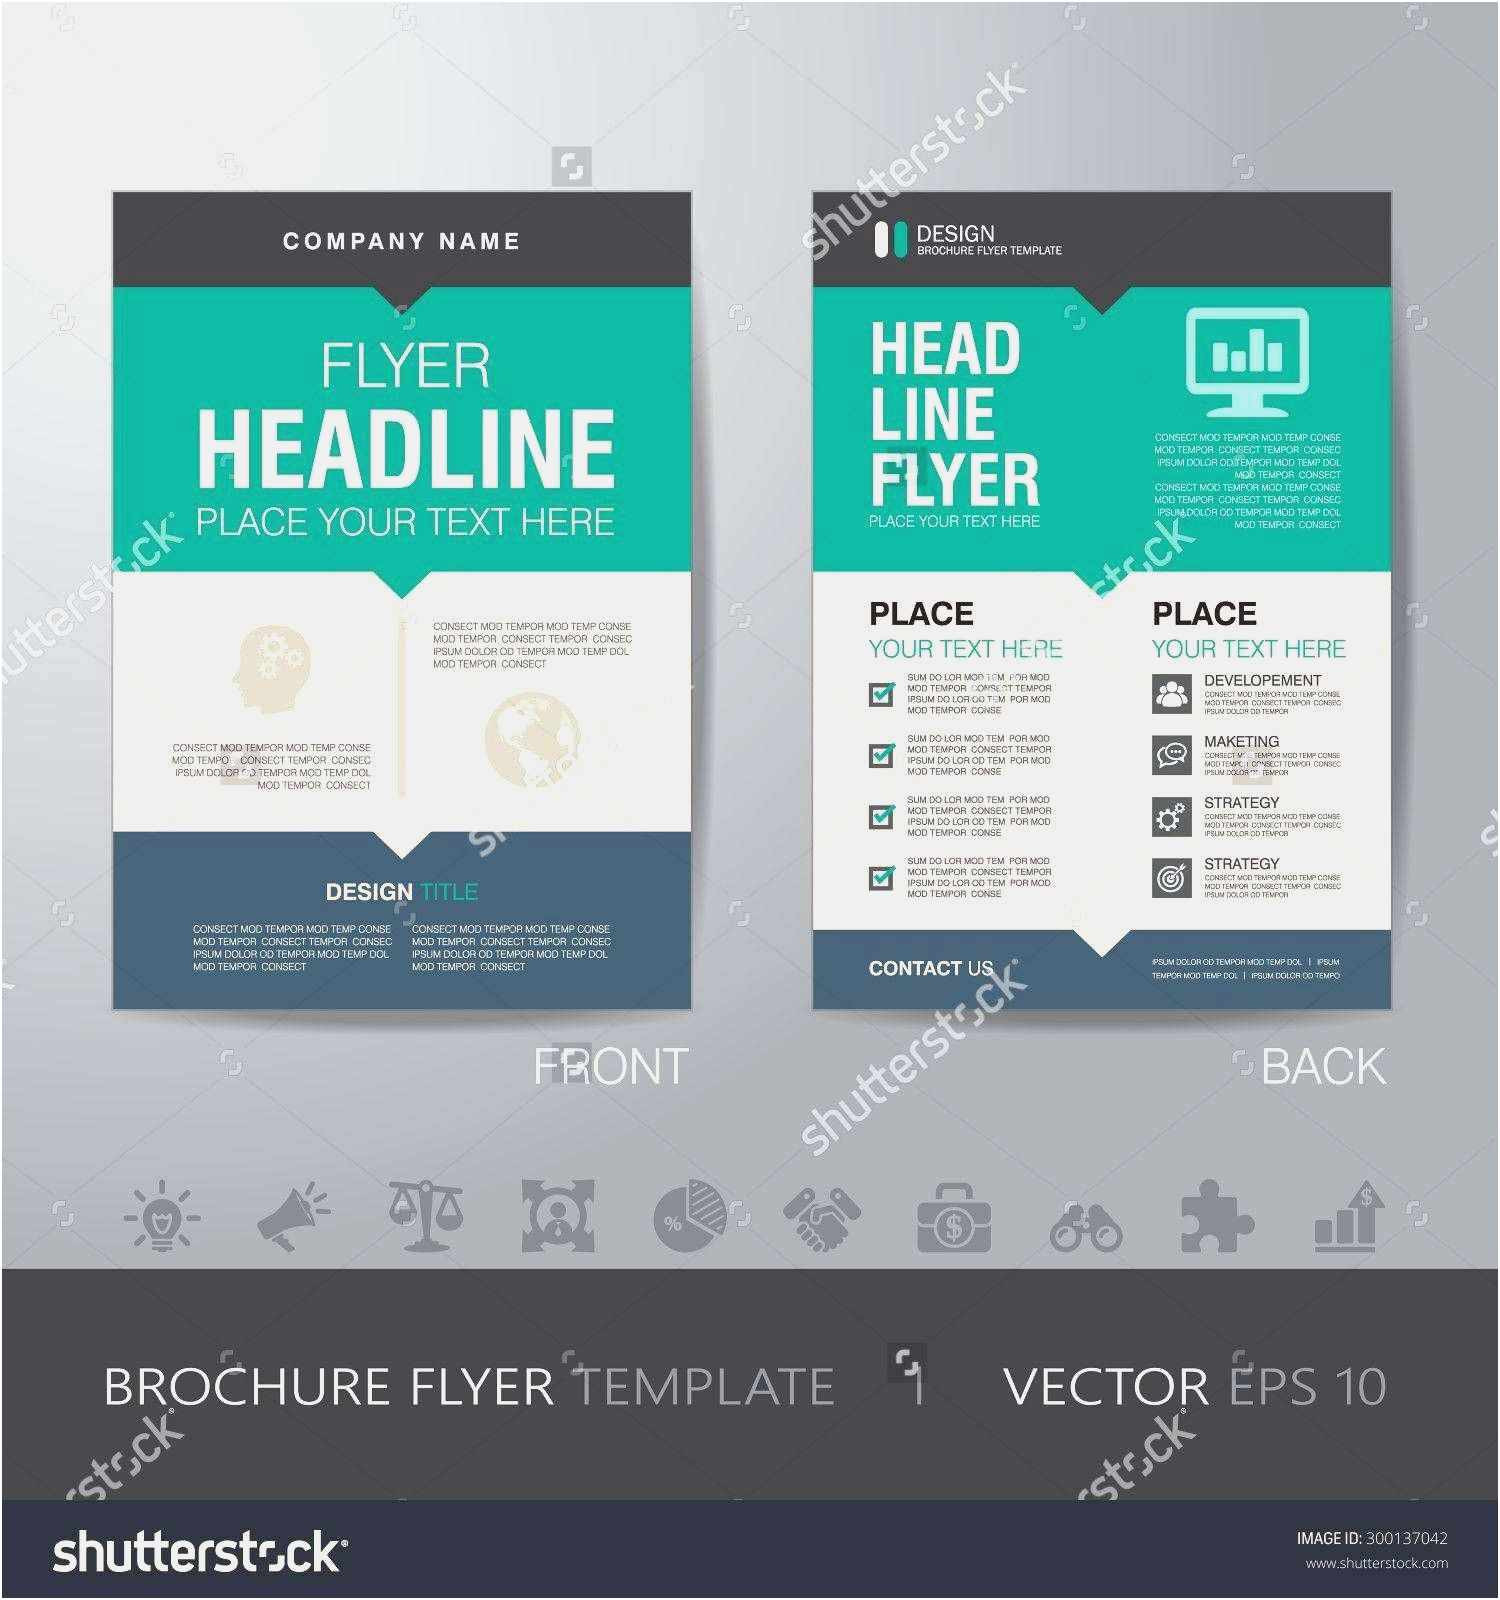 Free 55 Prophoto Templates Model Of Latest Business Card Templates